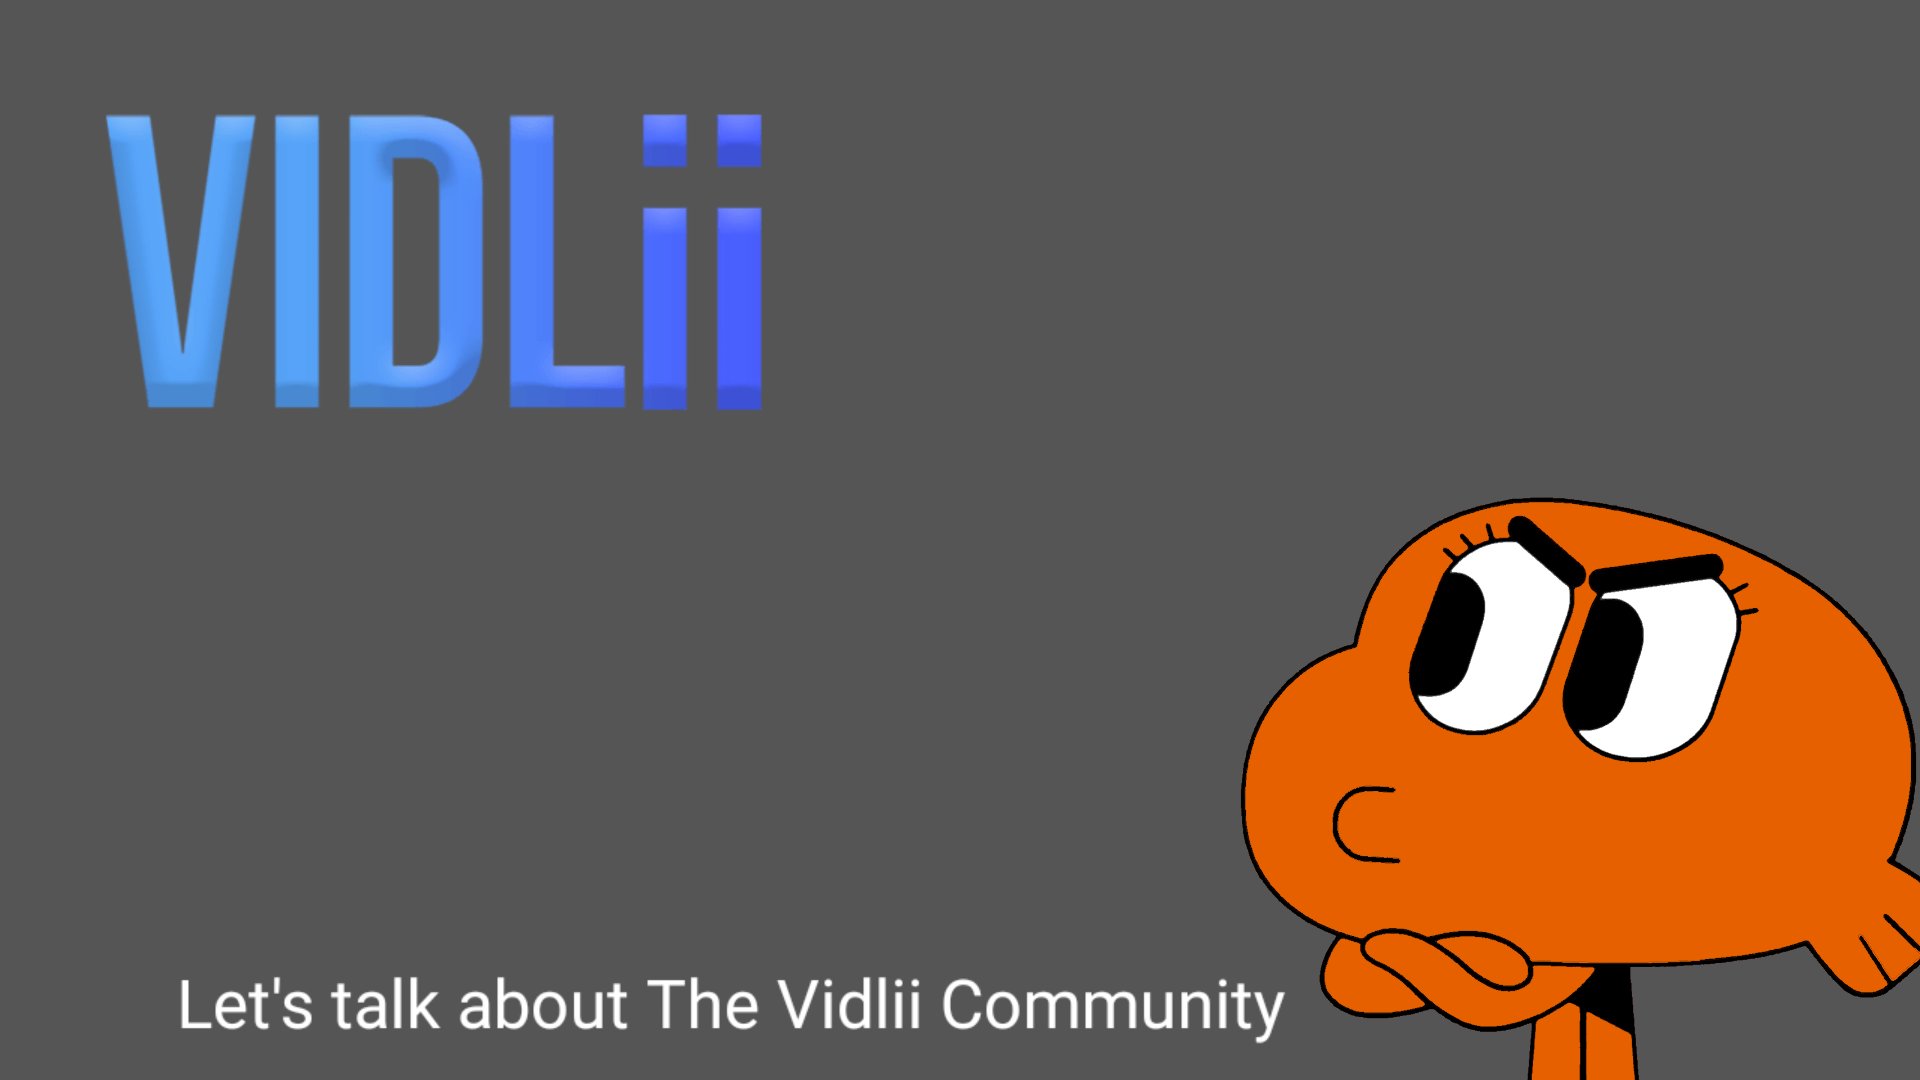 Lets talk about the Vidlii Community